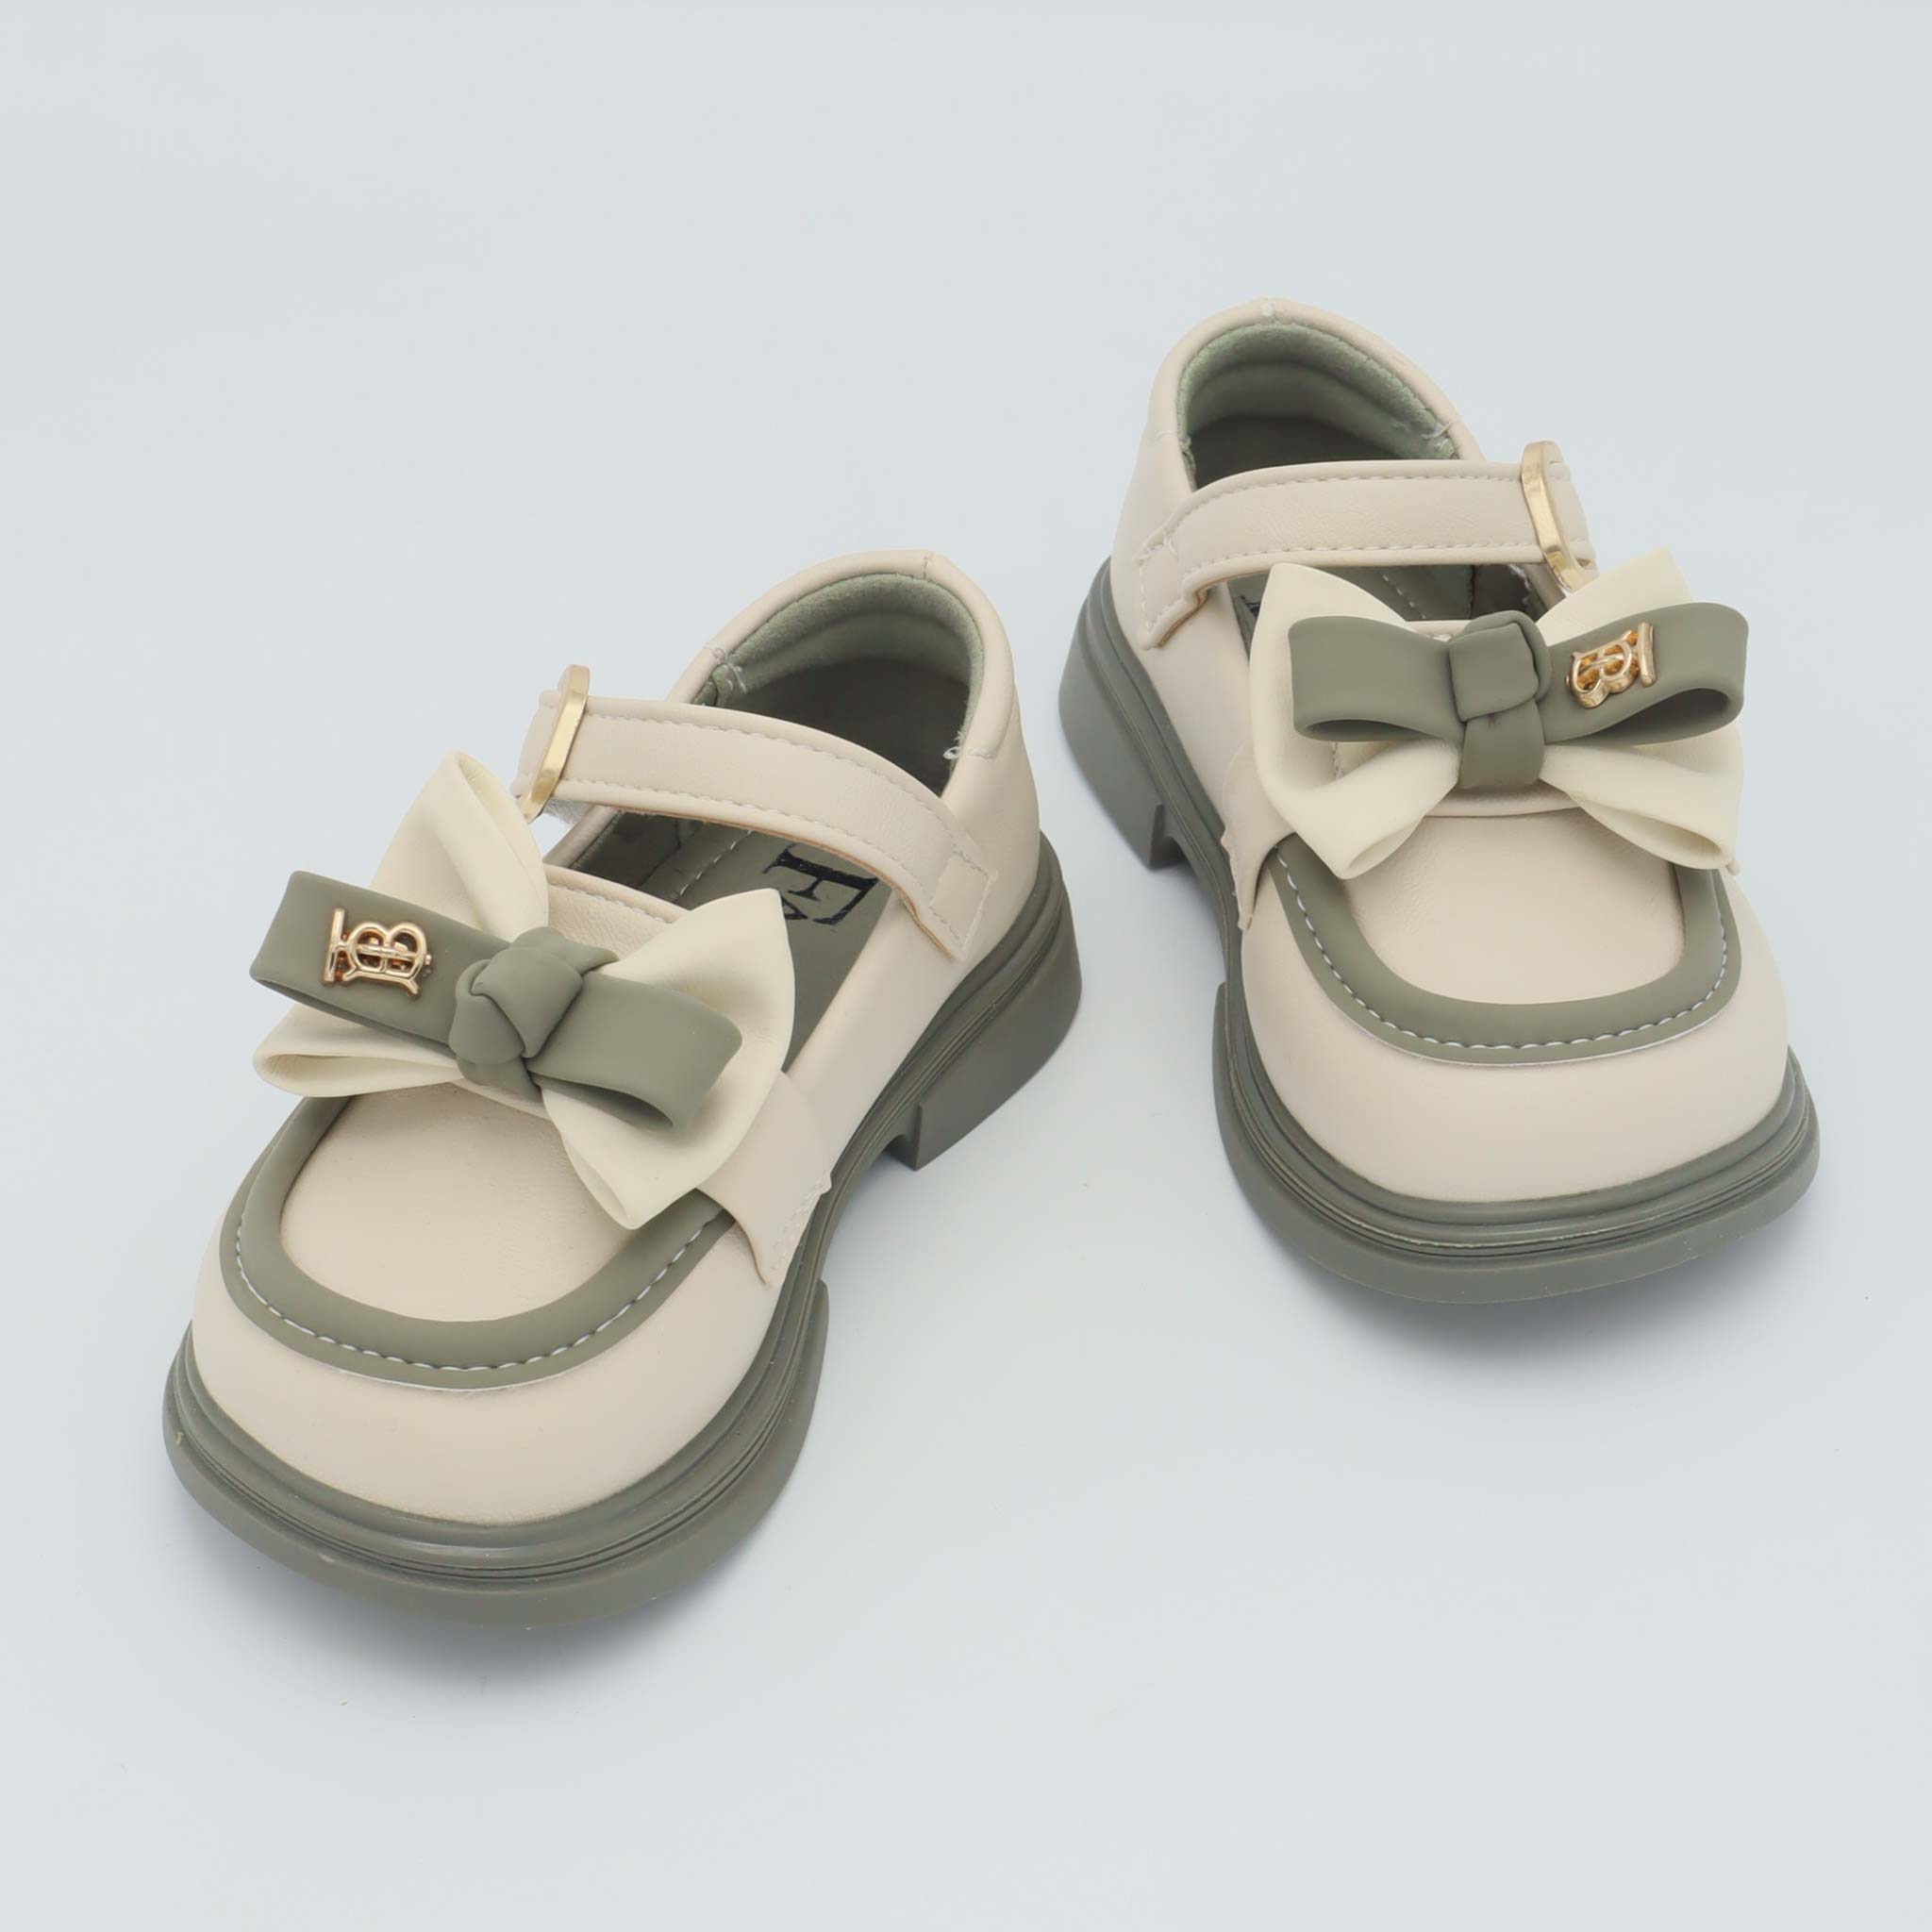 Baby Shoes Grey & Light Pink Color